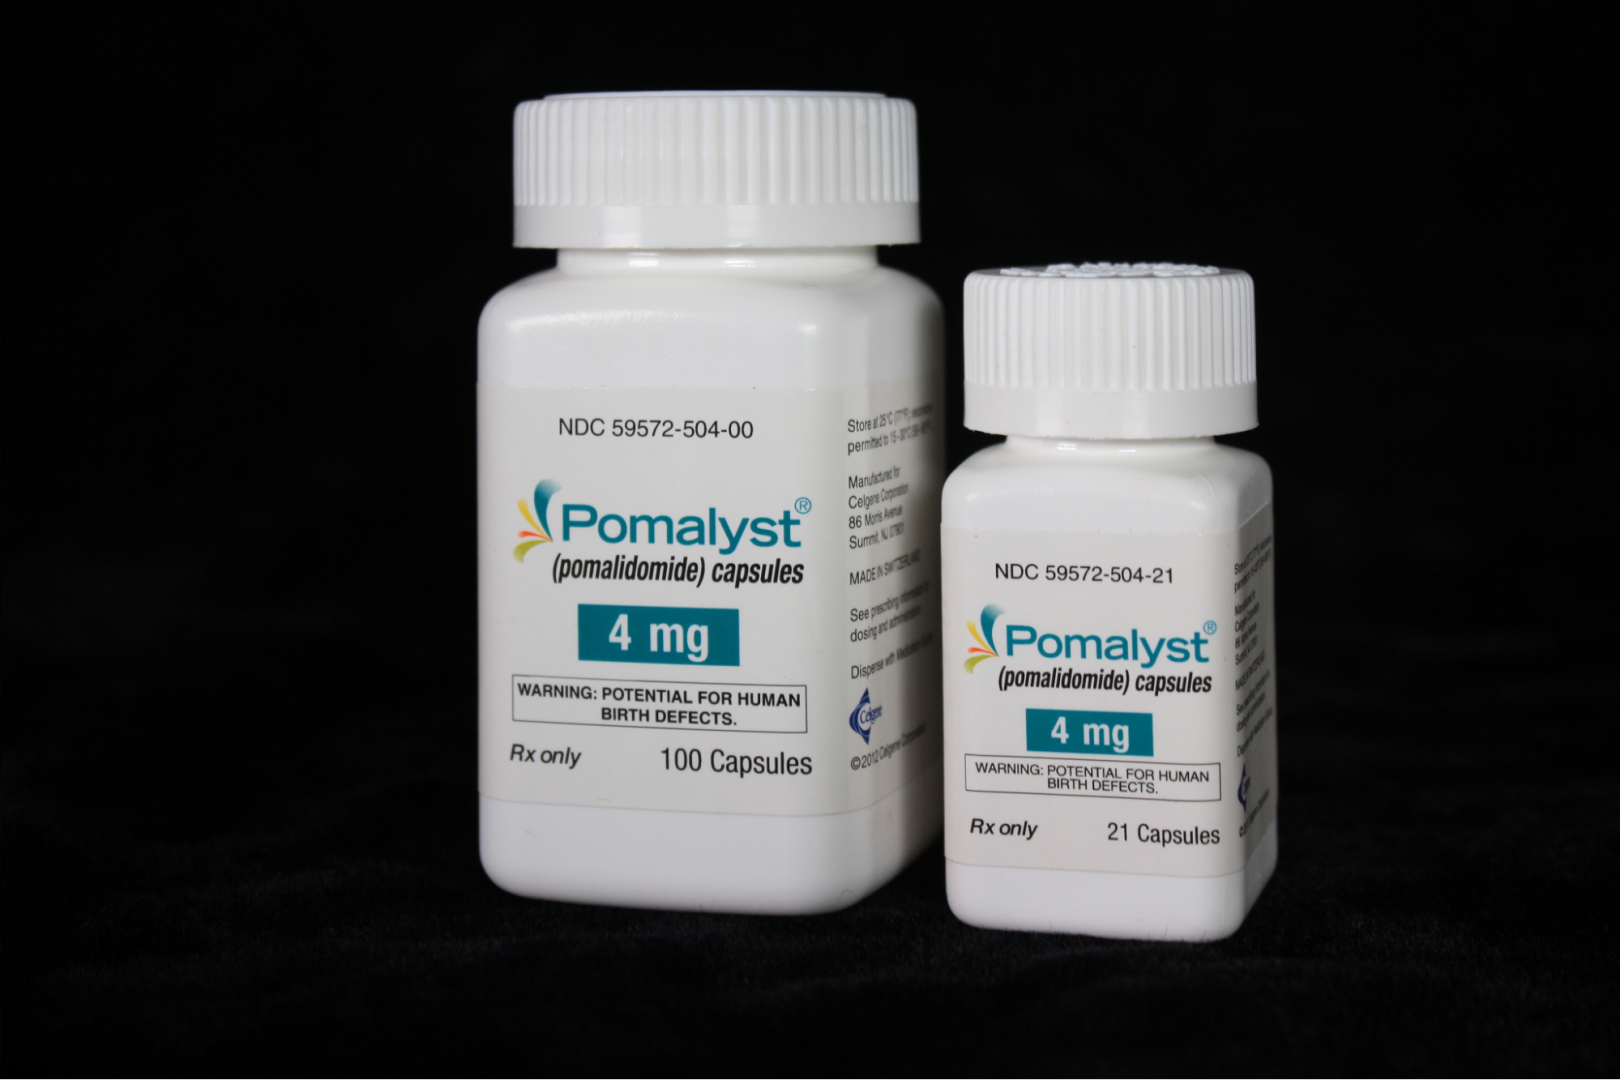 Pomalyst - Popular Drugs Manufactured by Bristol Myers Squibb